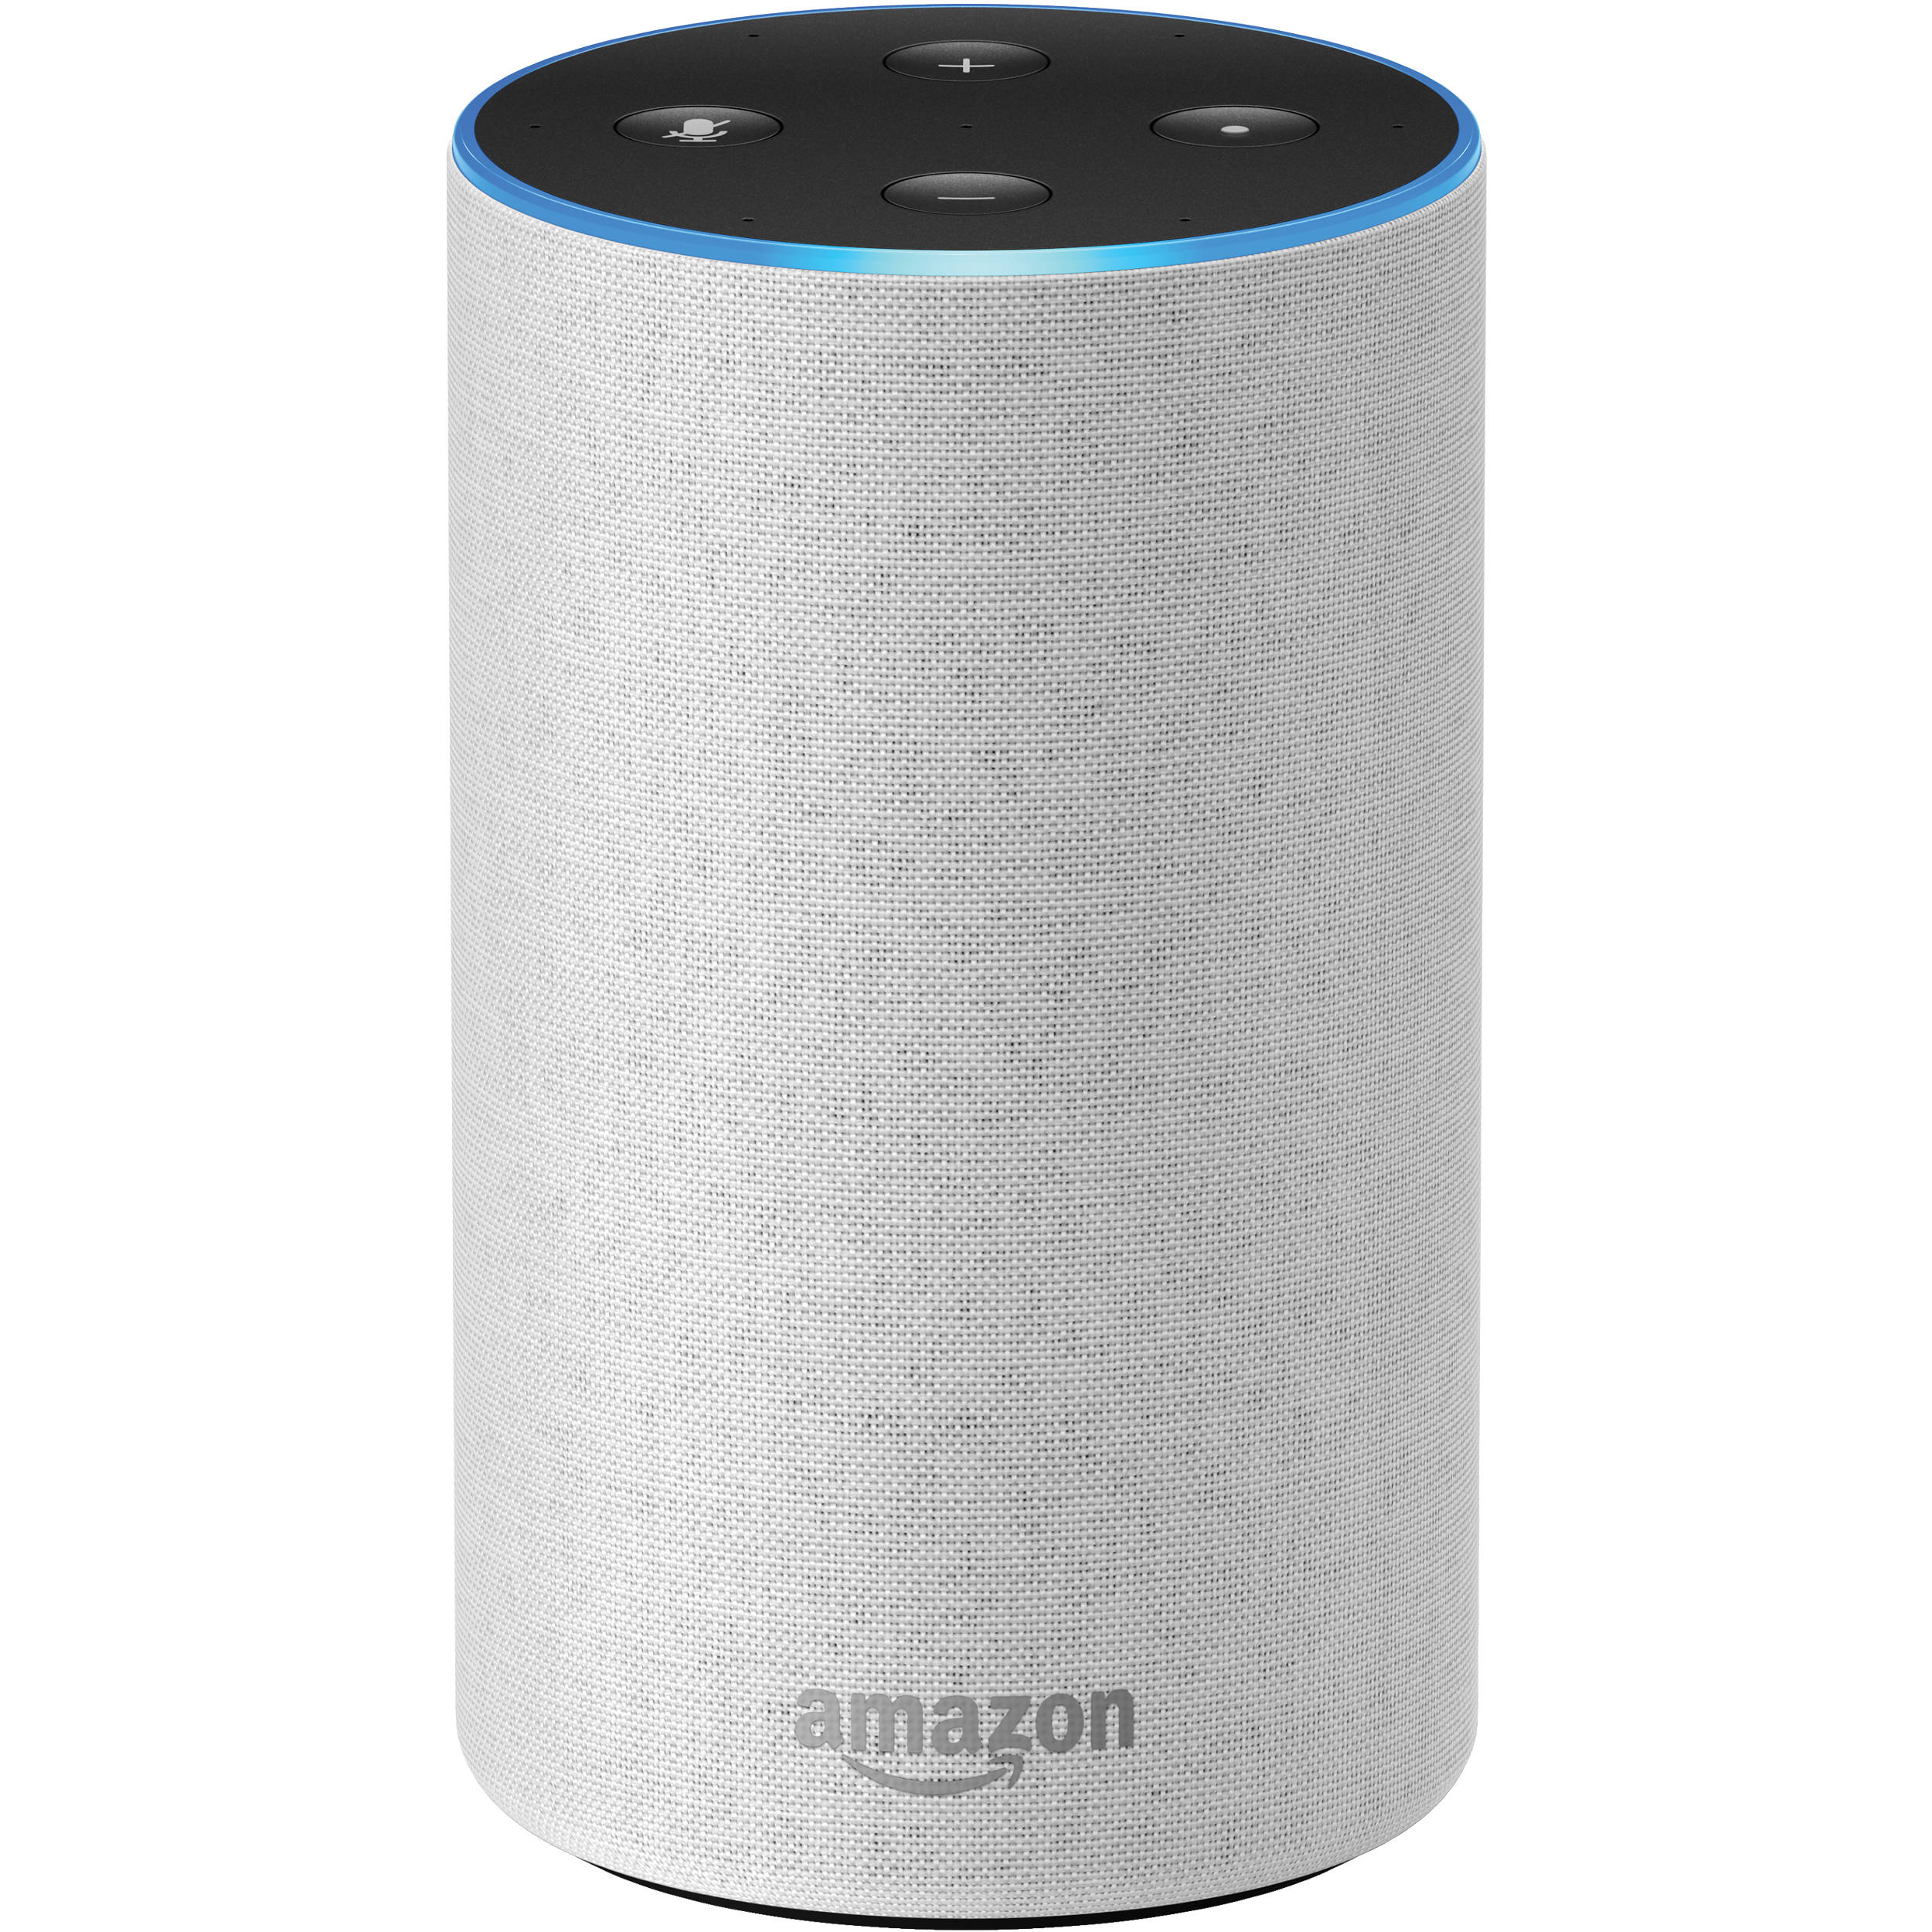 The Amazon Echo Drop In lets you eavesdrop on friends and family.